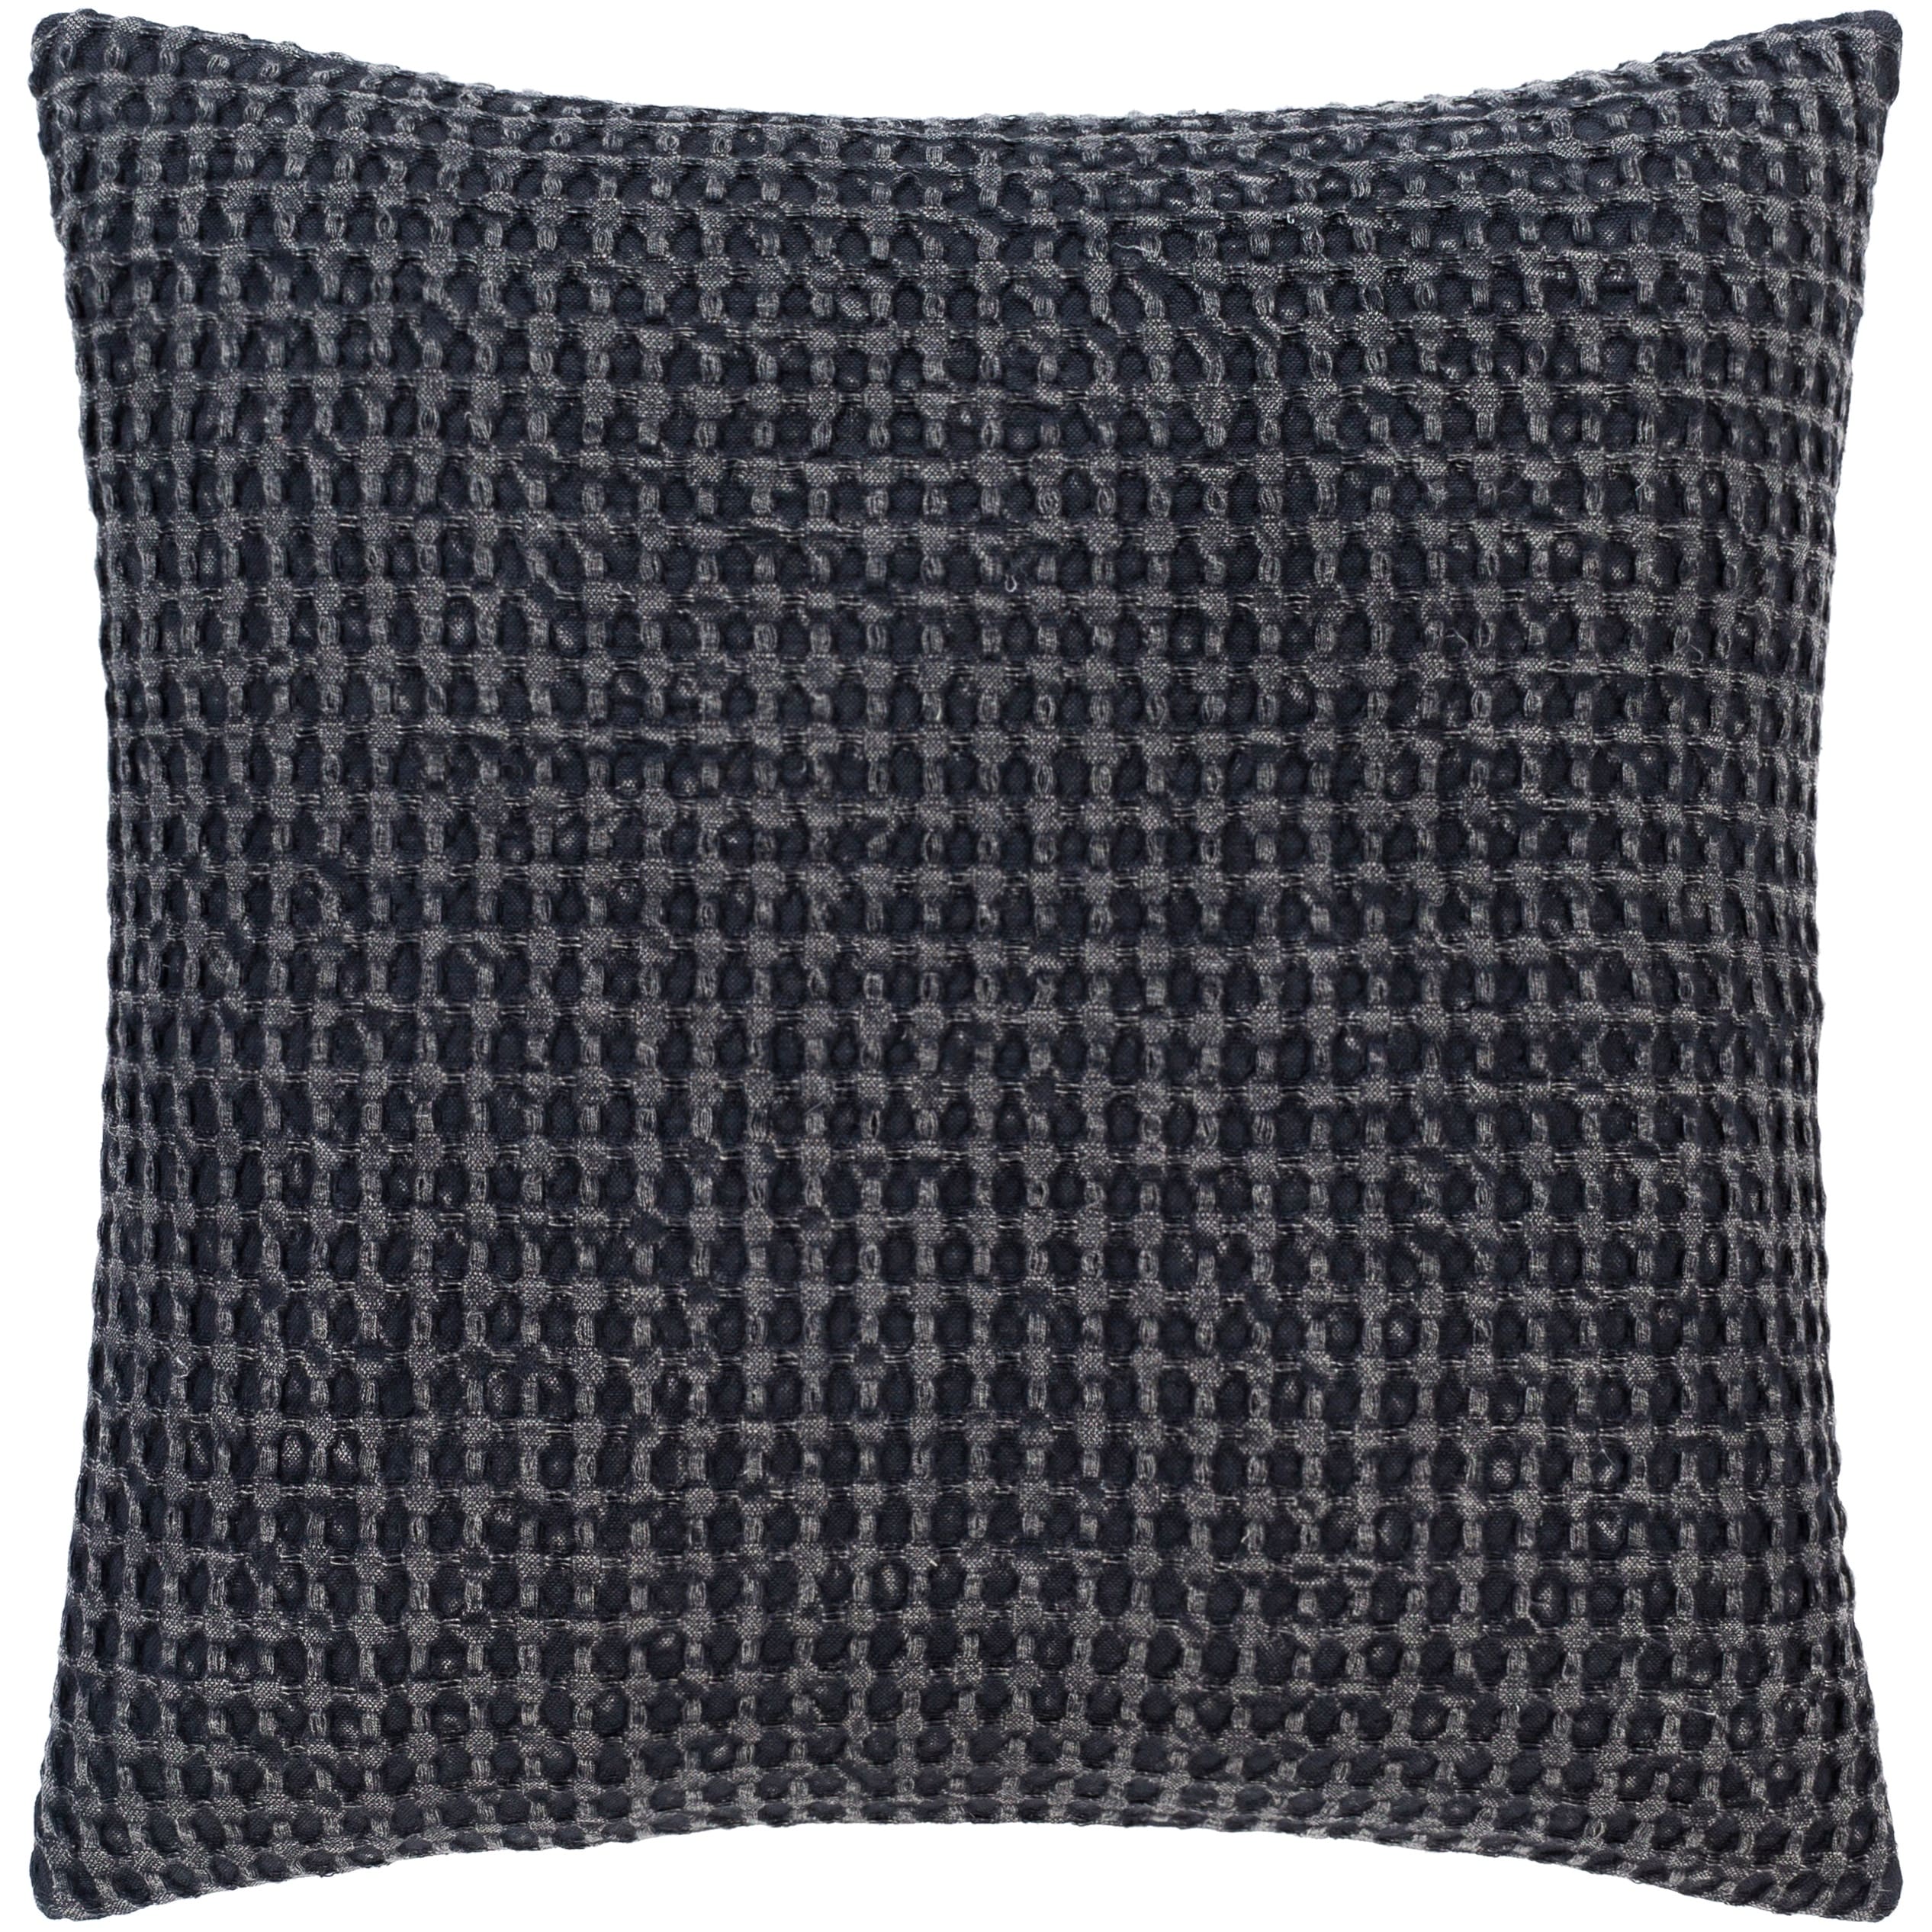 https://ak1.ostkcdn.com/images/products/is/images/direct/5198933f671344b7f5399037ec9c2abf07fe6d12/Whitley-Faded-Waffle-Weave-Cotton-Throw-Pillow.jpg